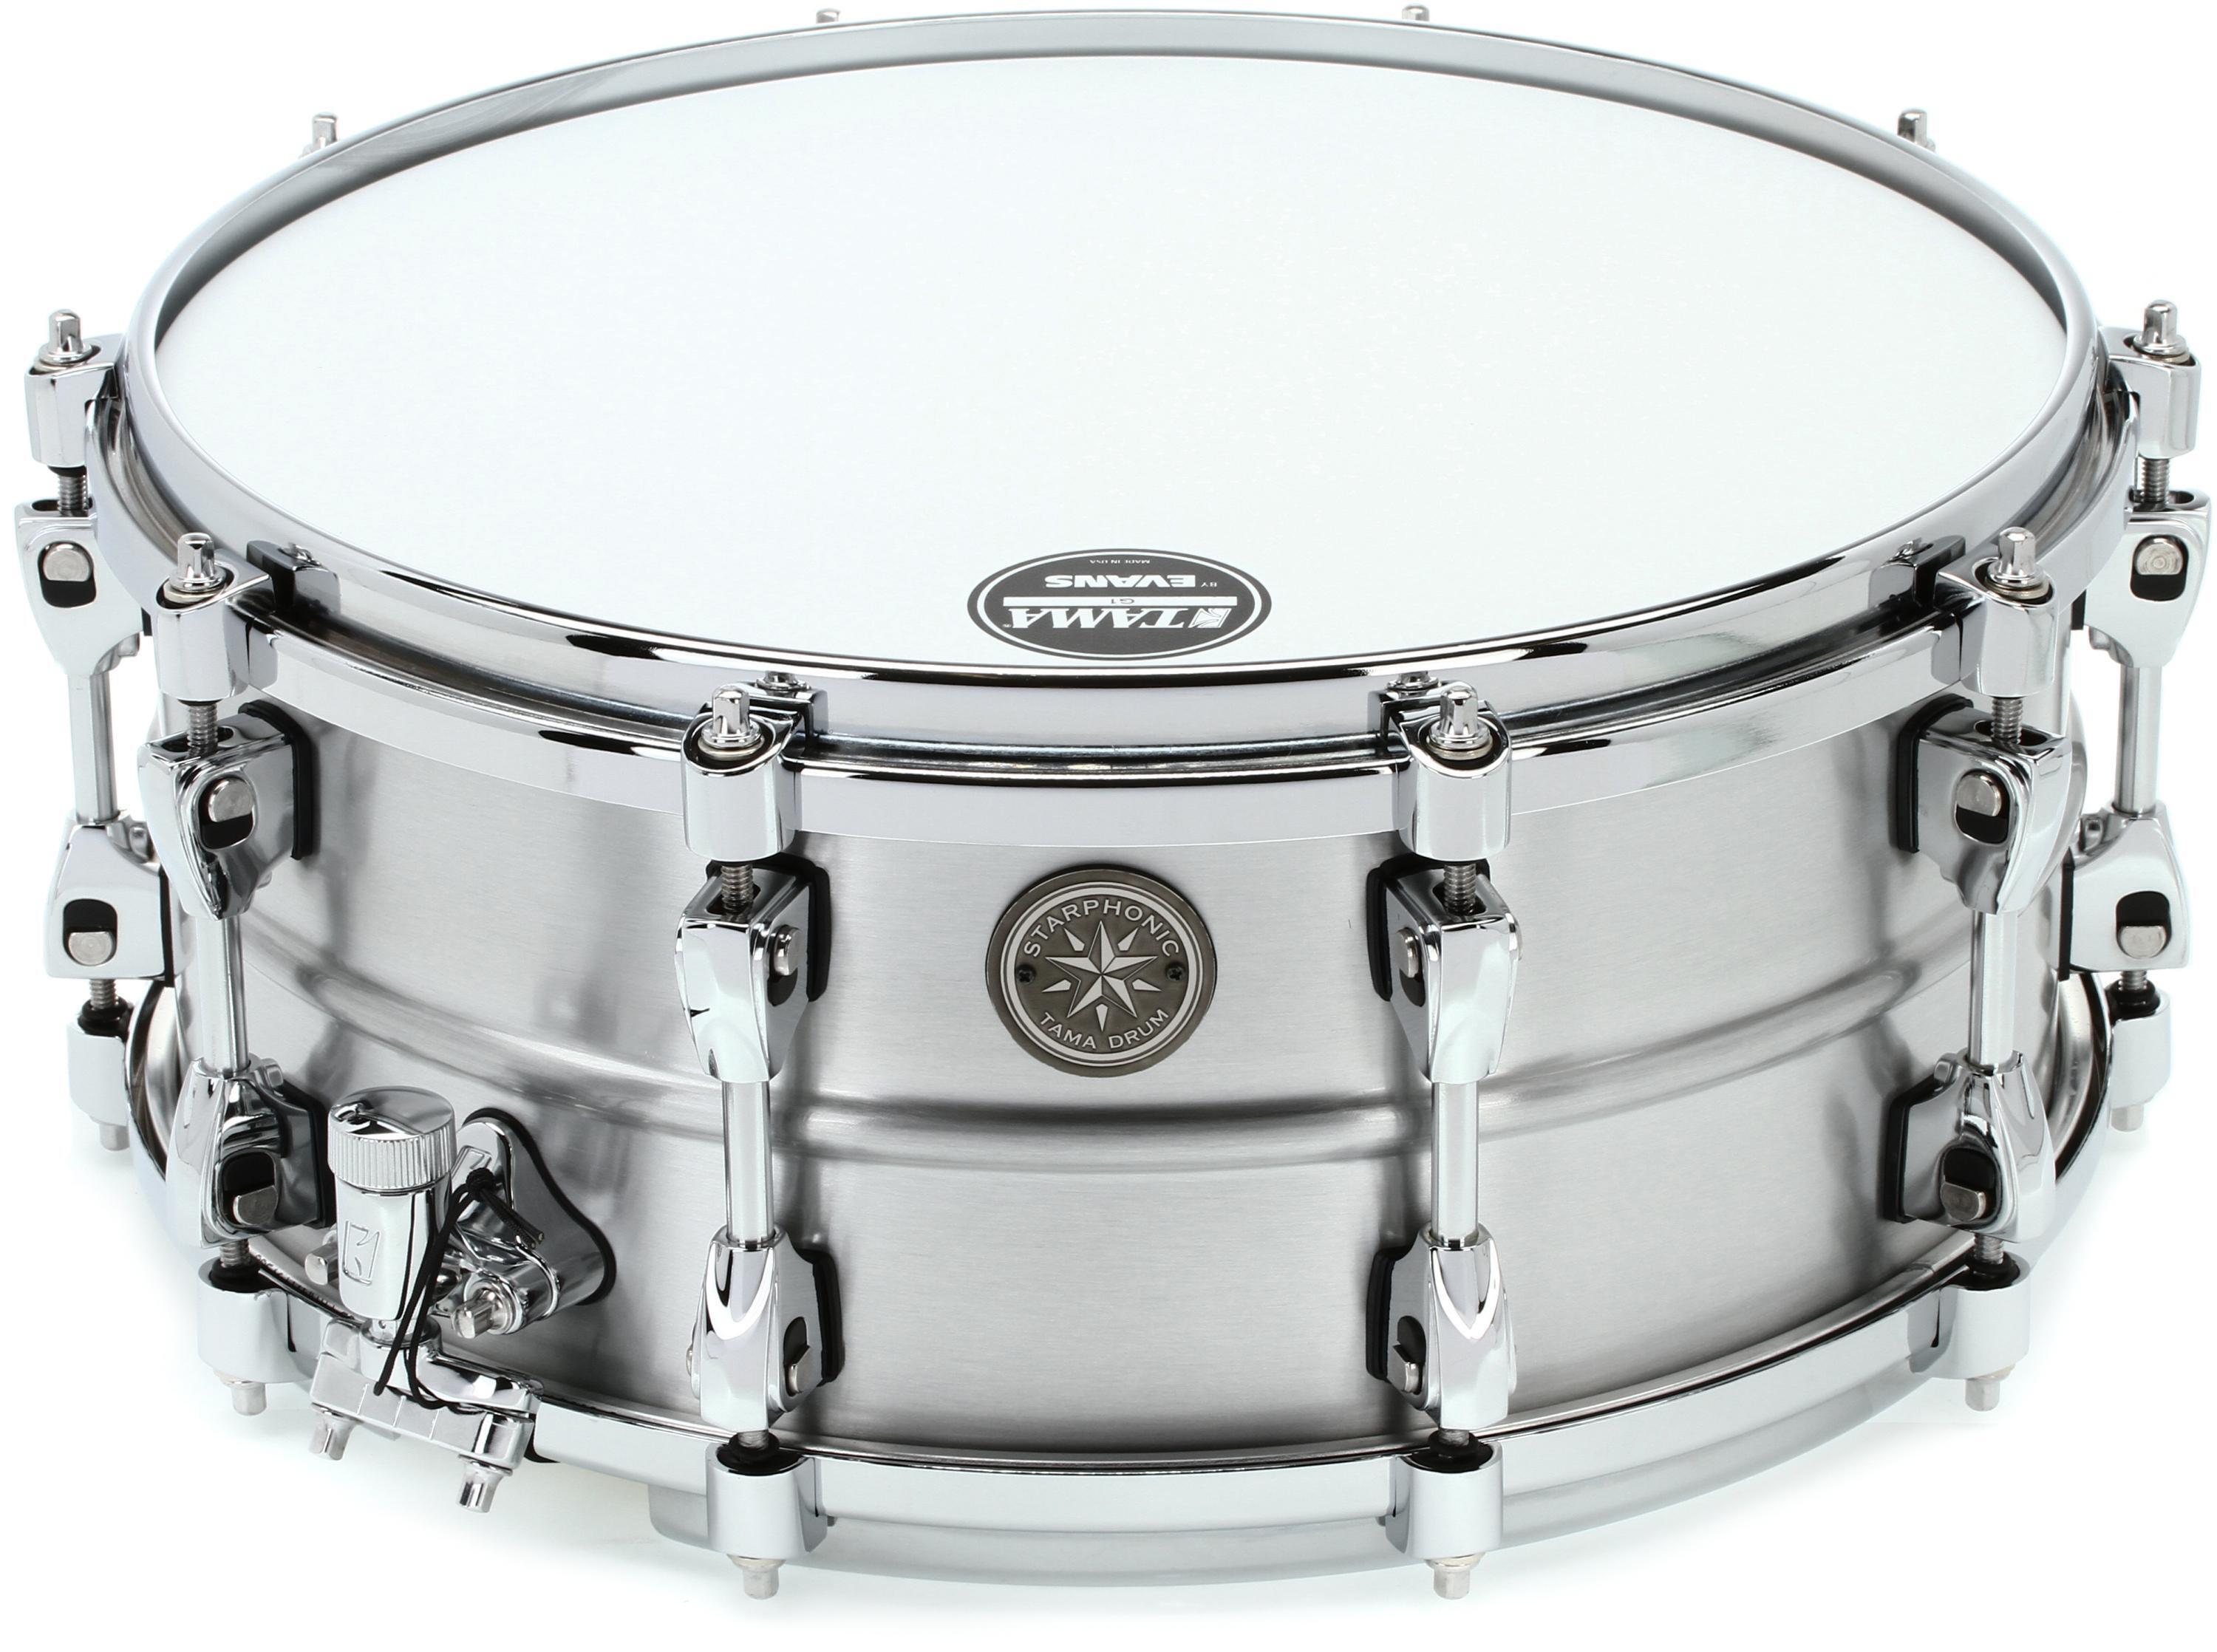 Tama Starphonic Series Snare Drum - 6 inch x 14 inch, Silver